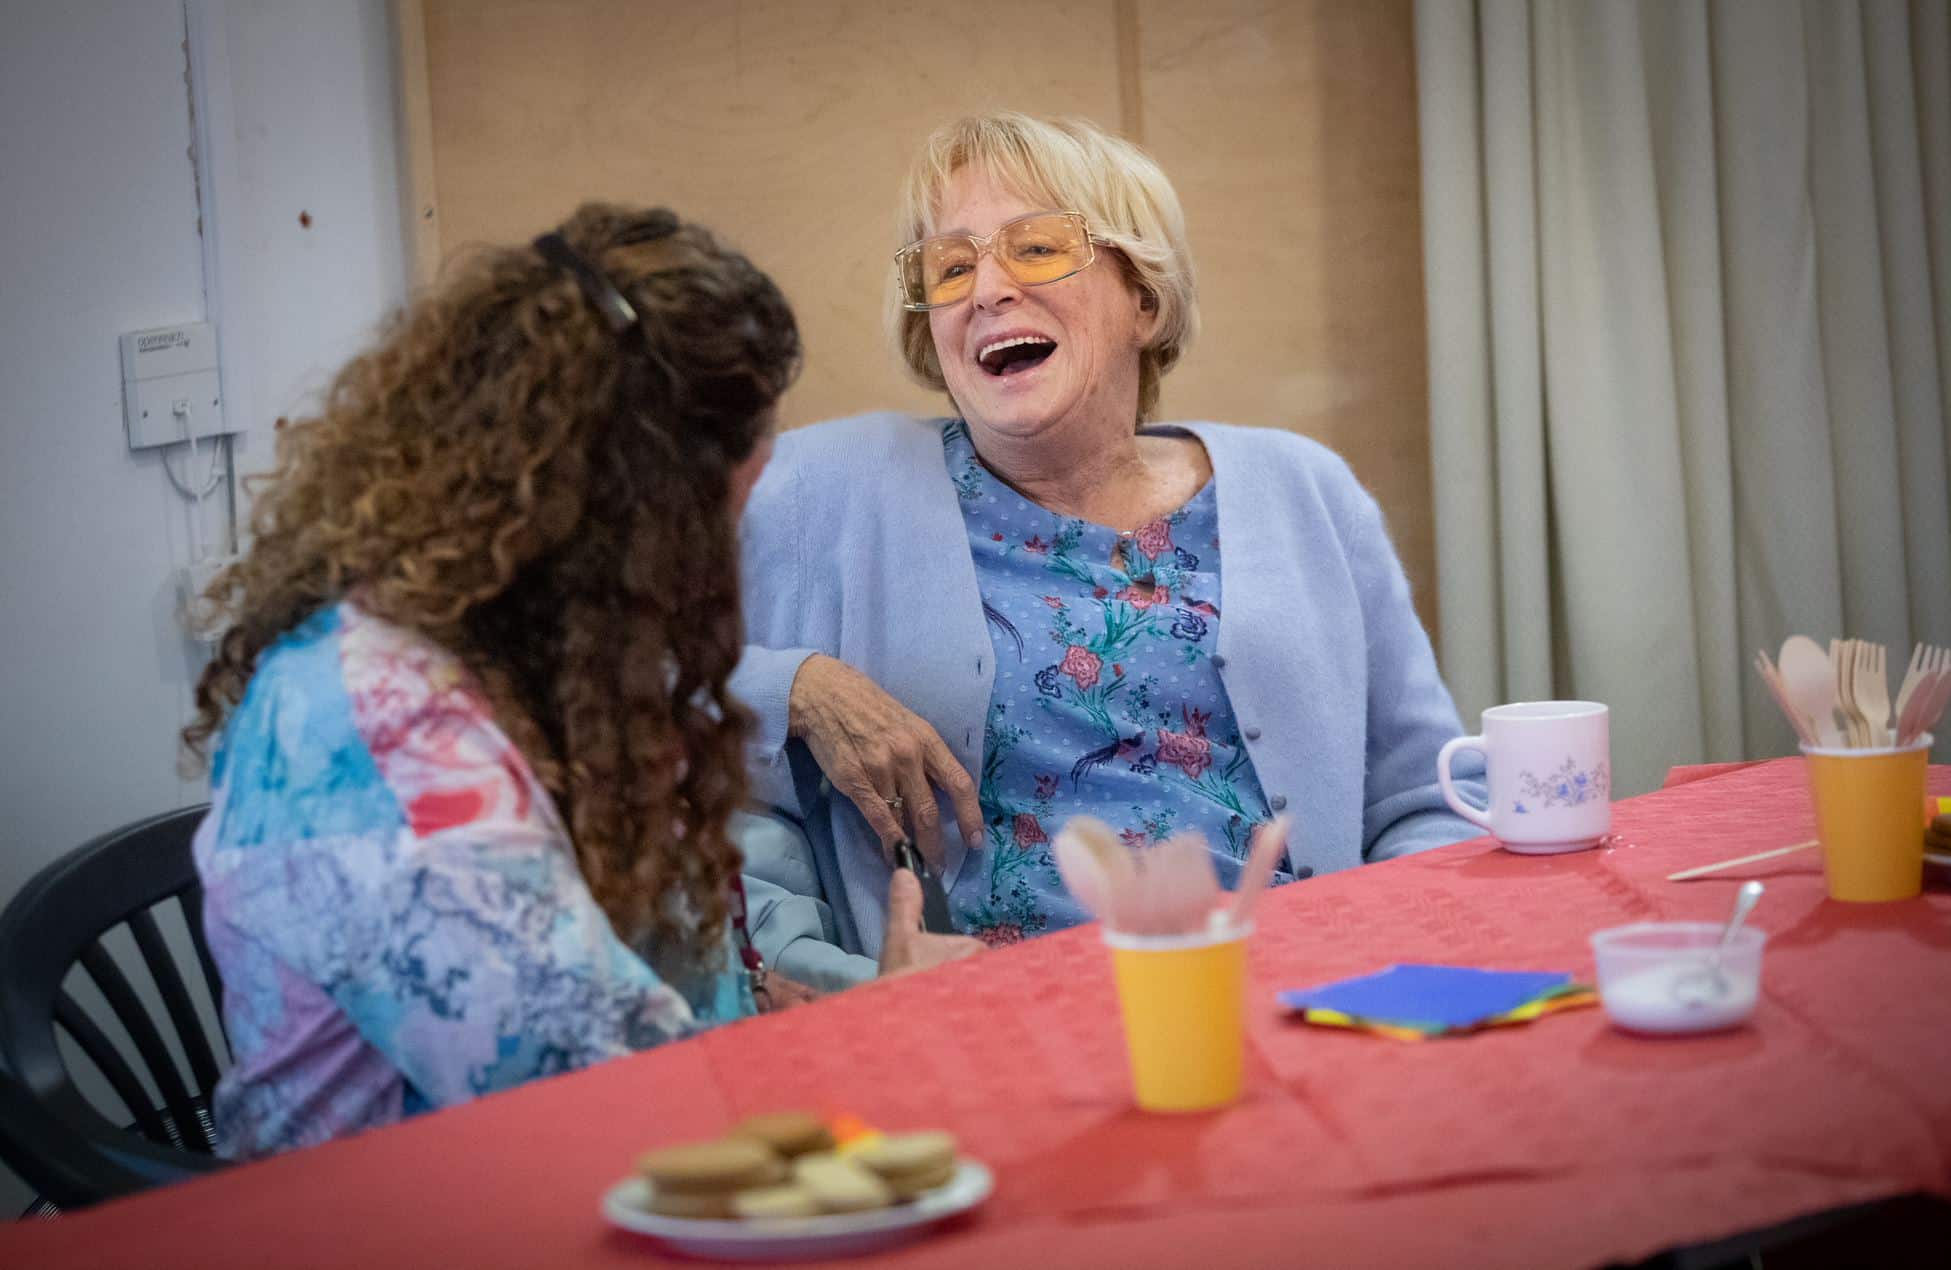 Two women sit at a table with biscuits and tea. One is facing away from the camera talking to an older woman who is laughing enjoying their chat.